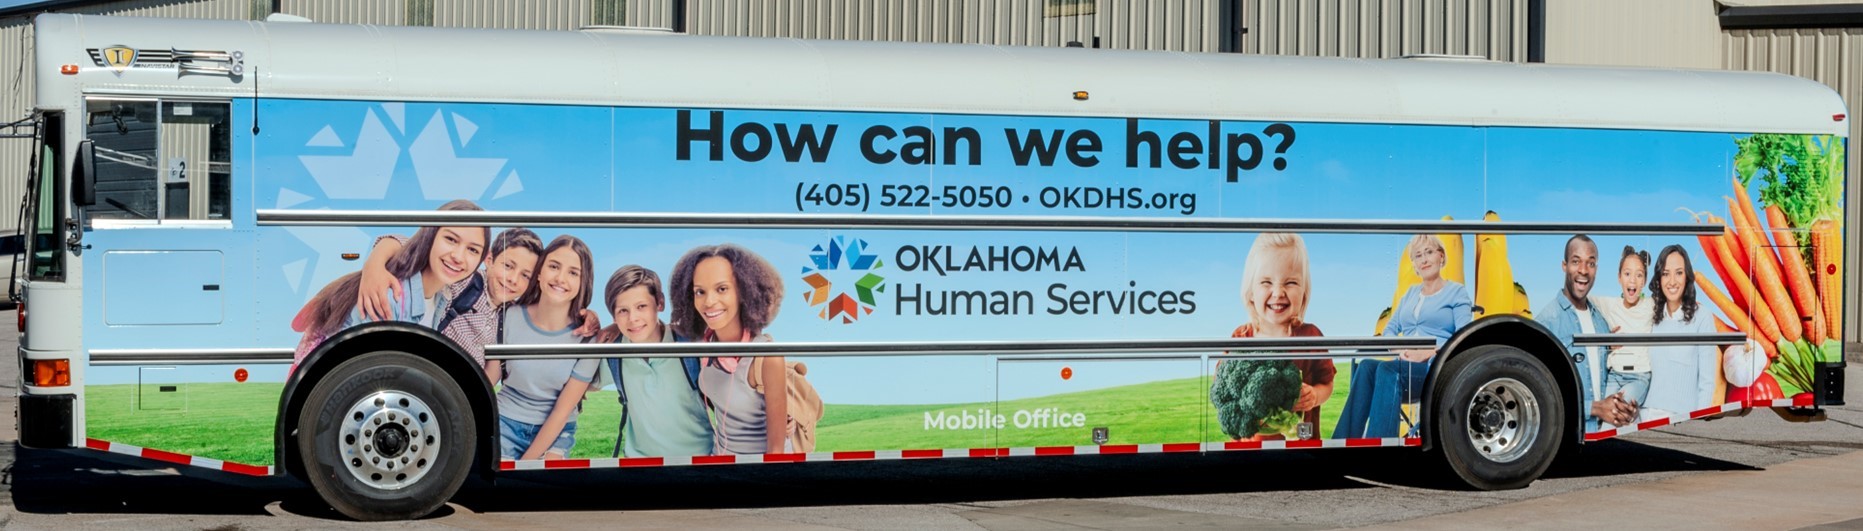 Photo of blue OKDHS mobile bus